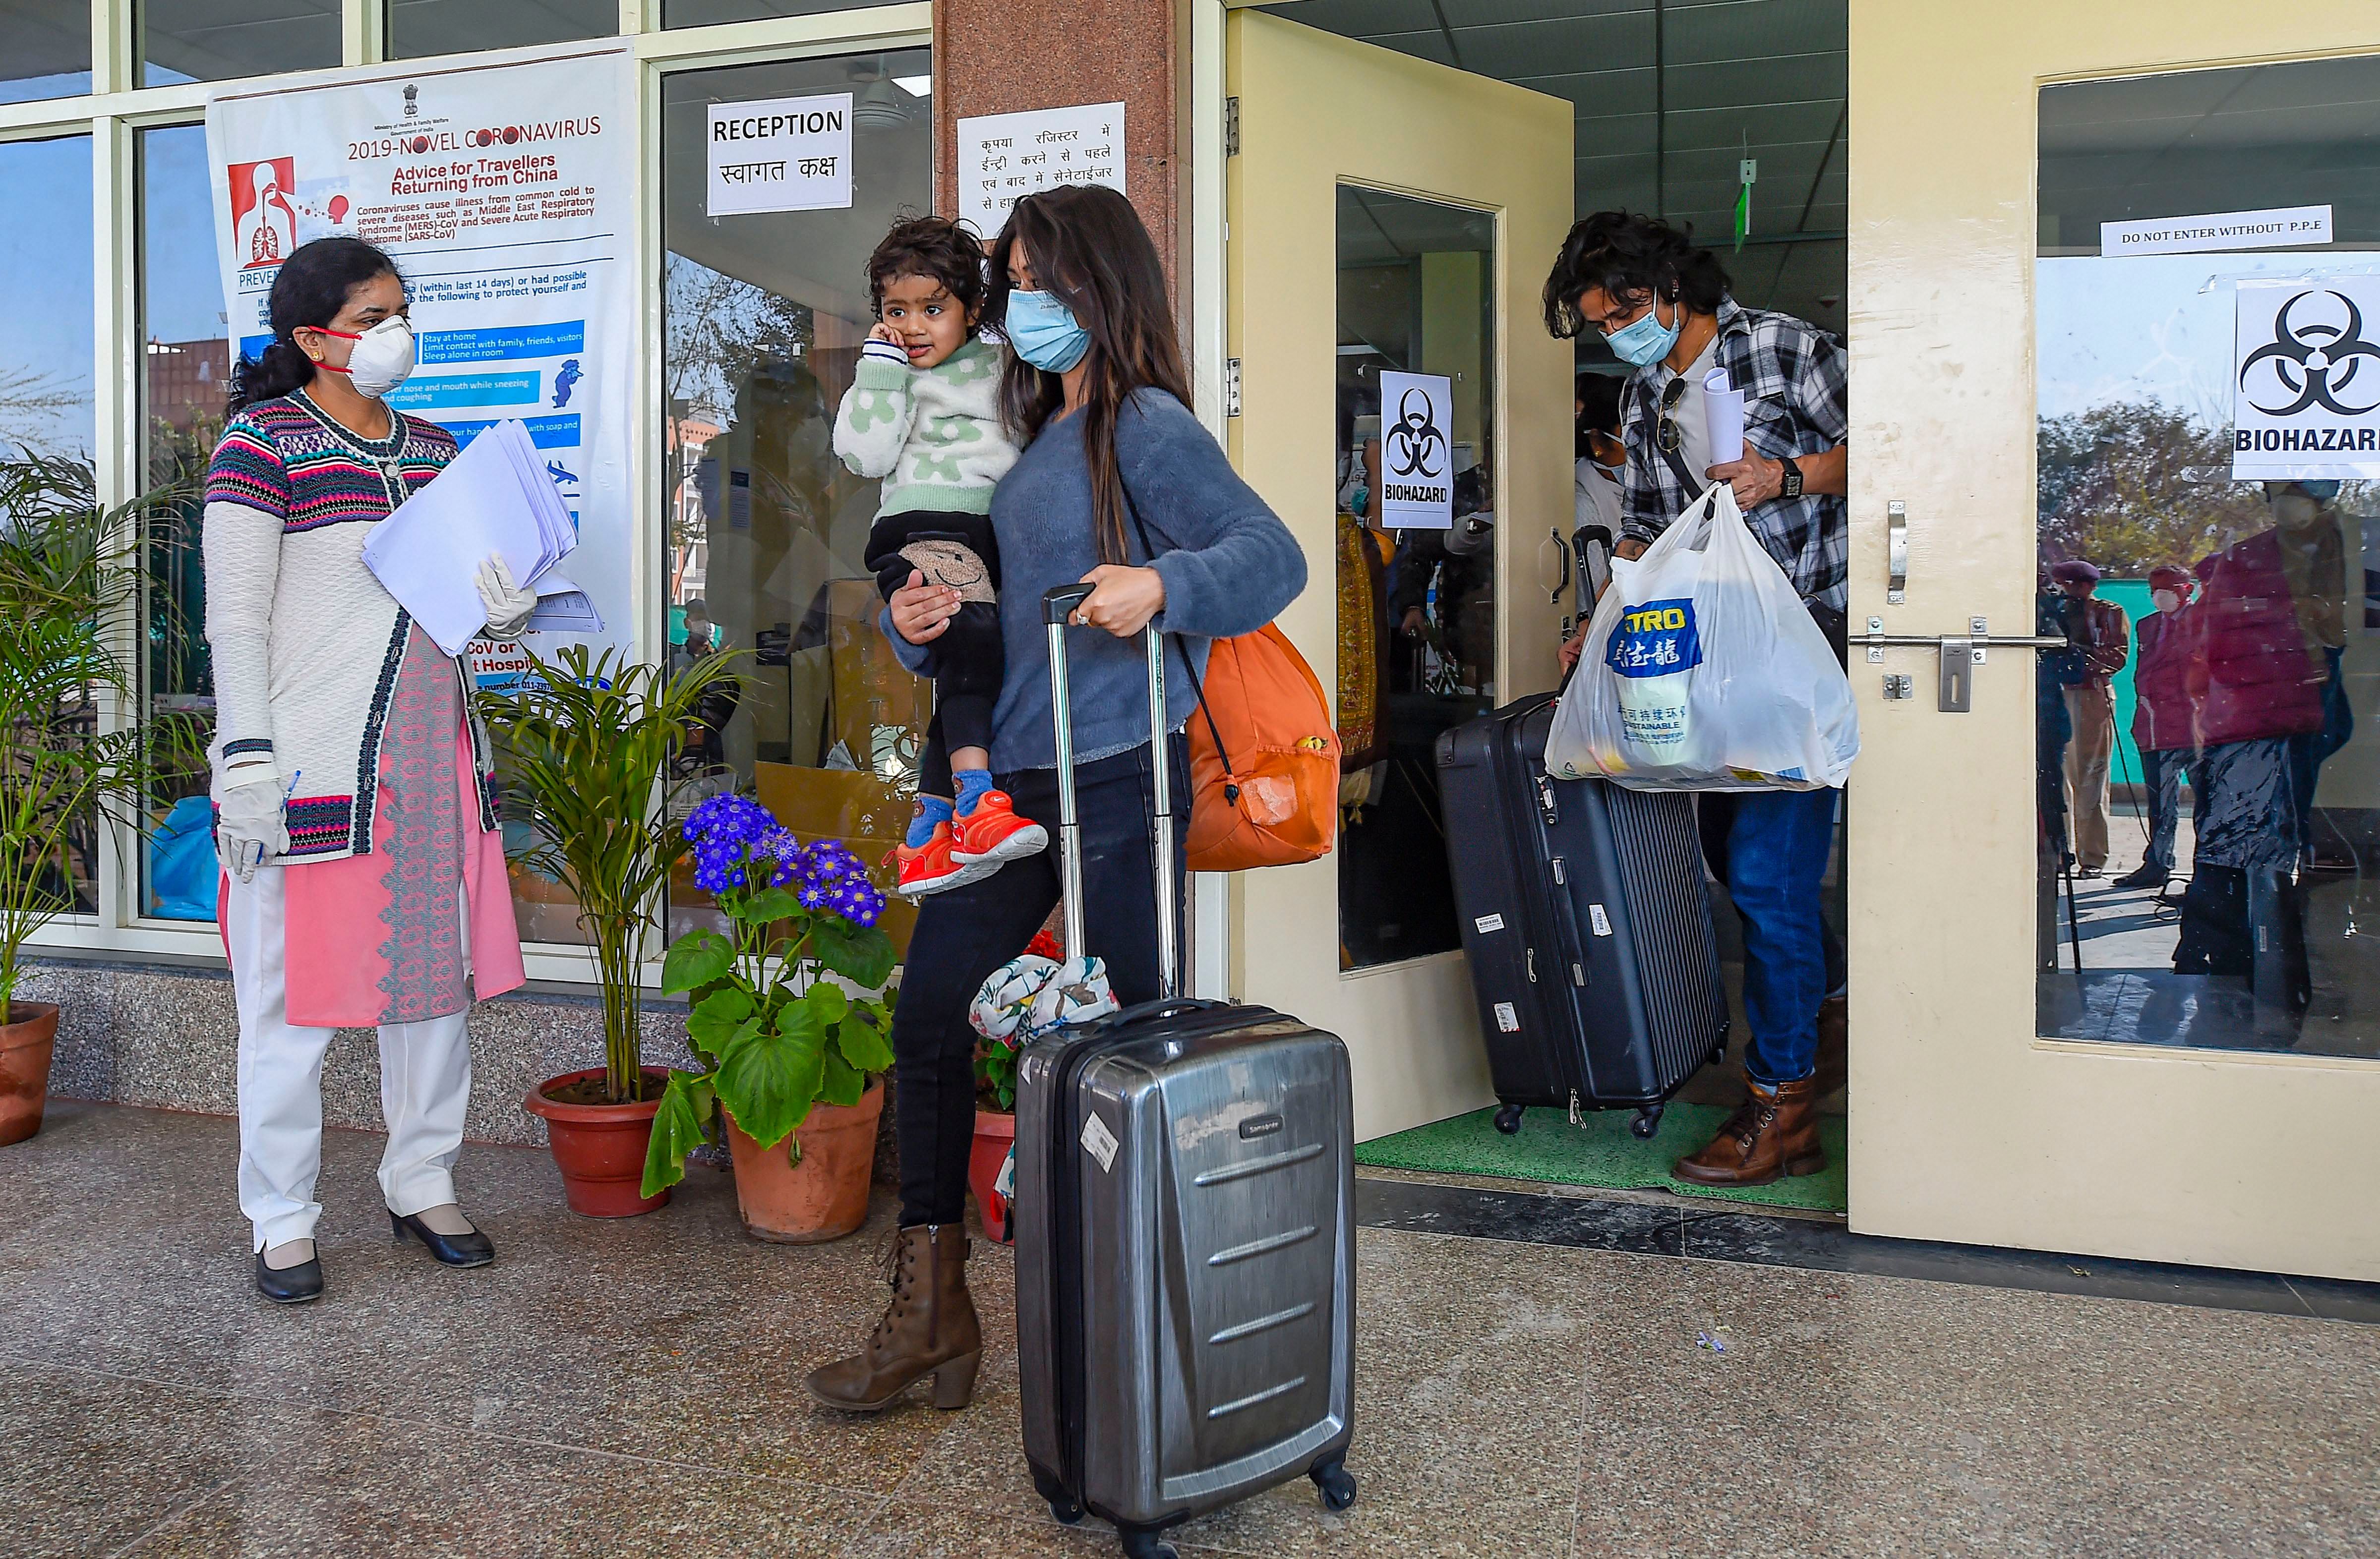 Indians who were air-lifted from Wuhan following out-break of the deadly novel cornavirus, prepare to leave following their release from the ITBP quarantine facility, at Chhawla, in New Delhi. (PTI Photo)